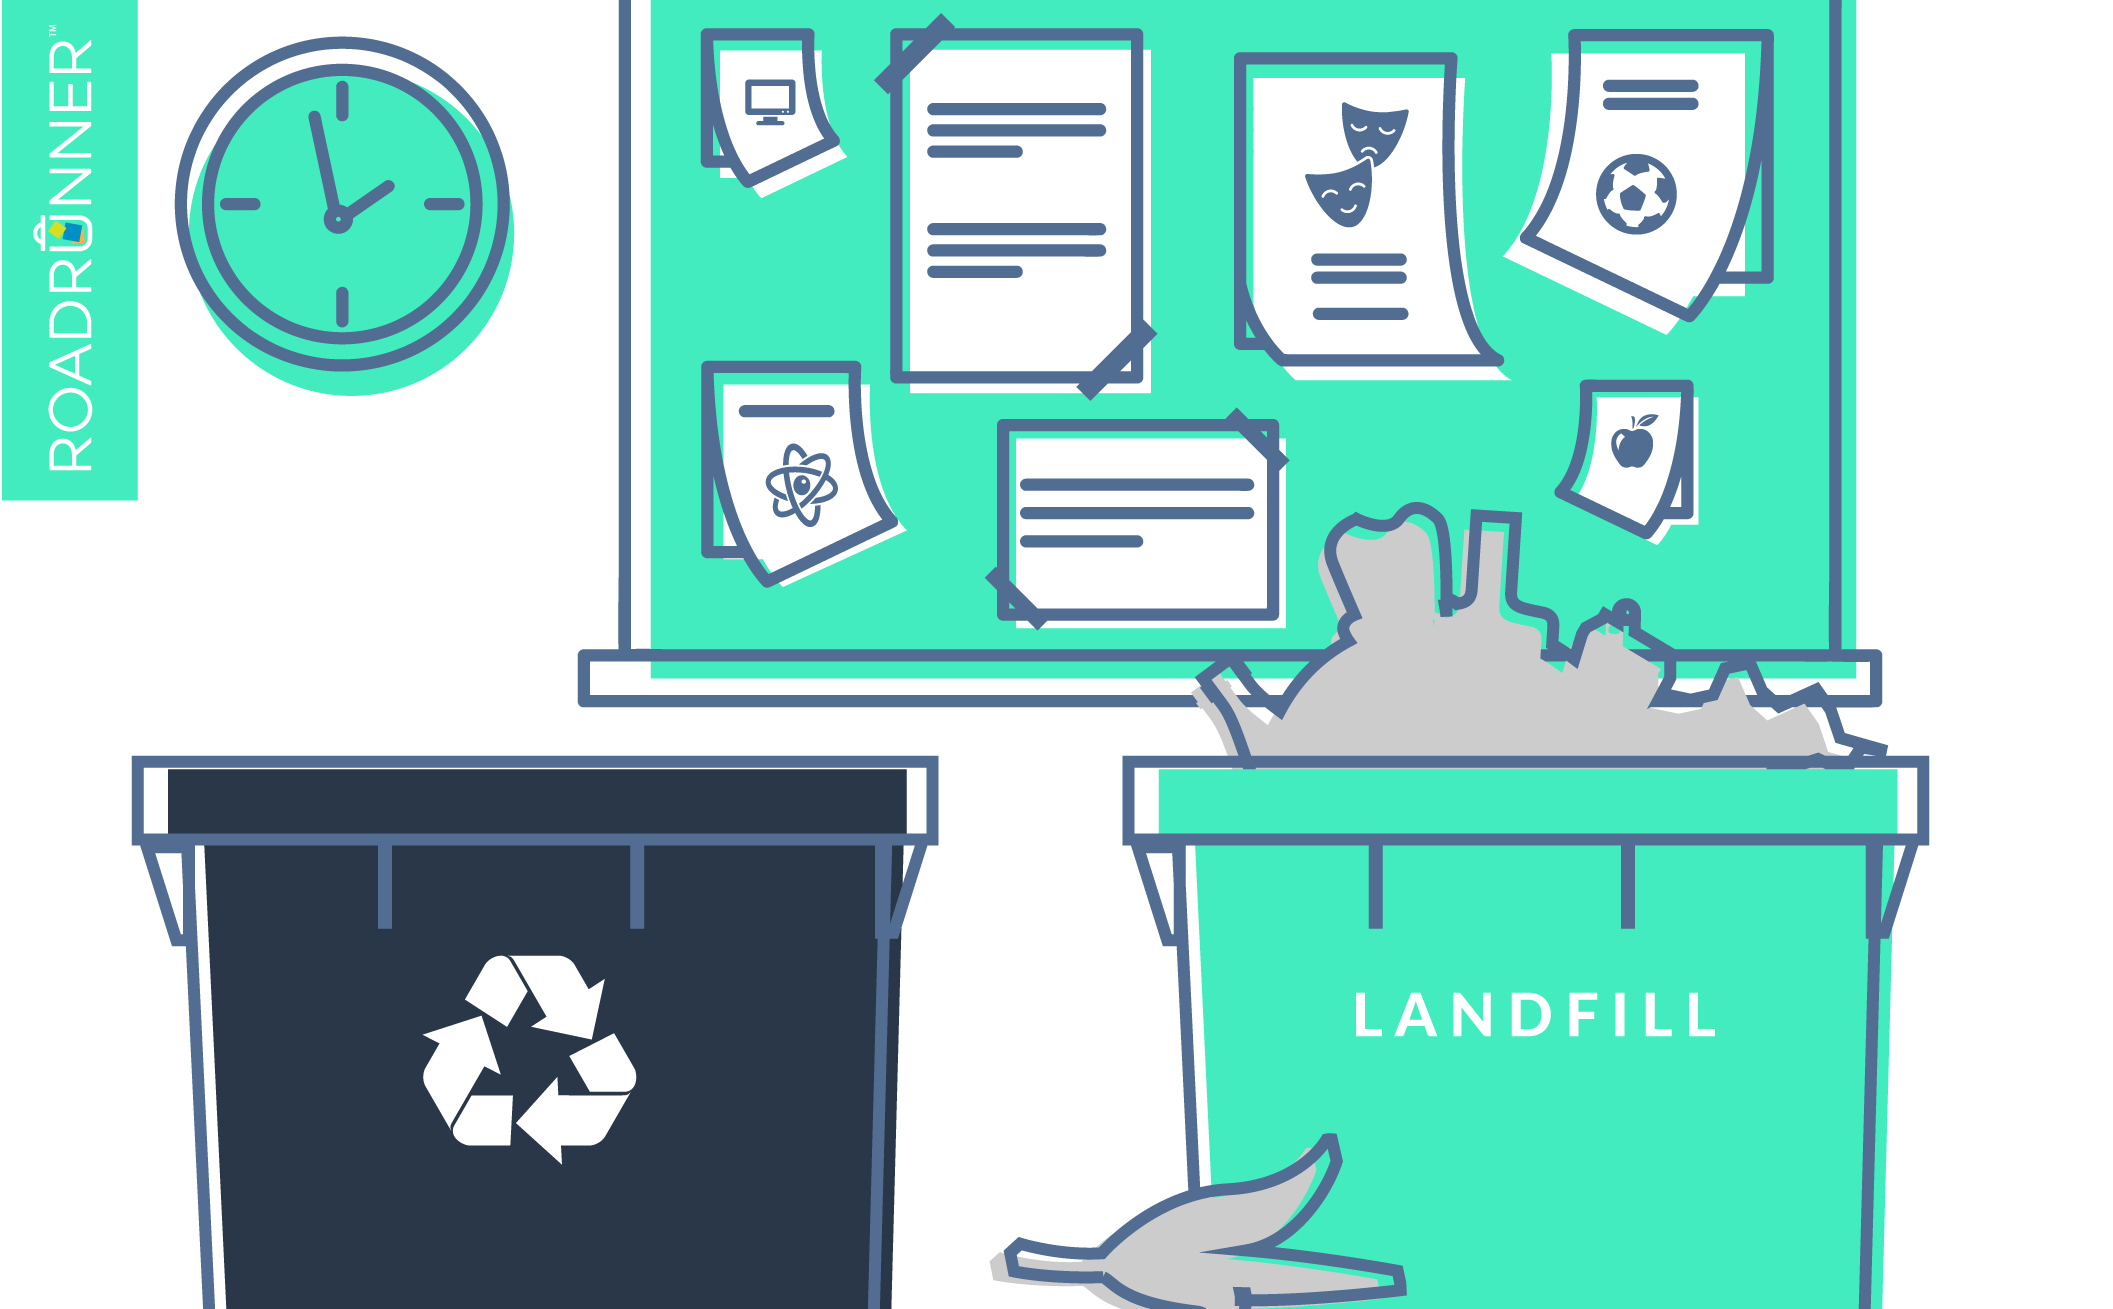 How to Improve Recycling & Sustainability in Schools